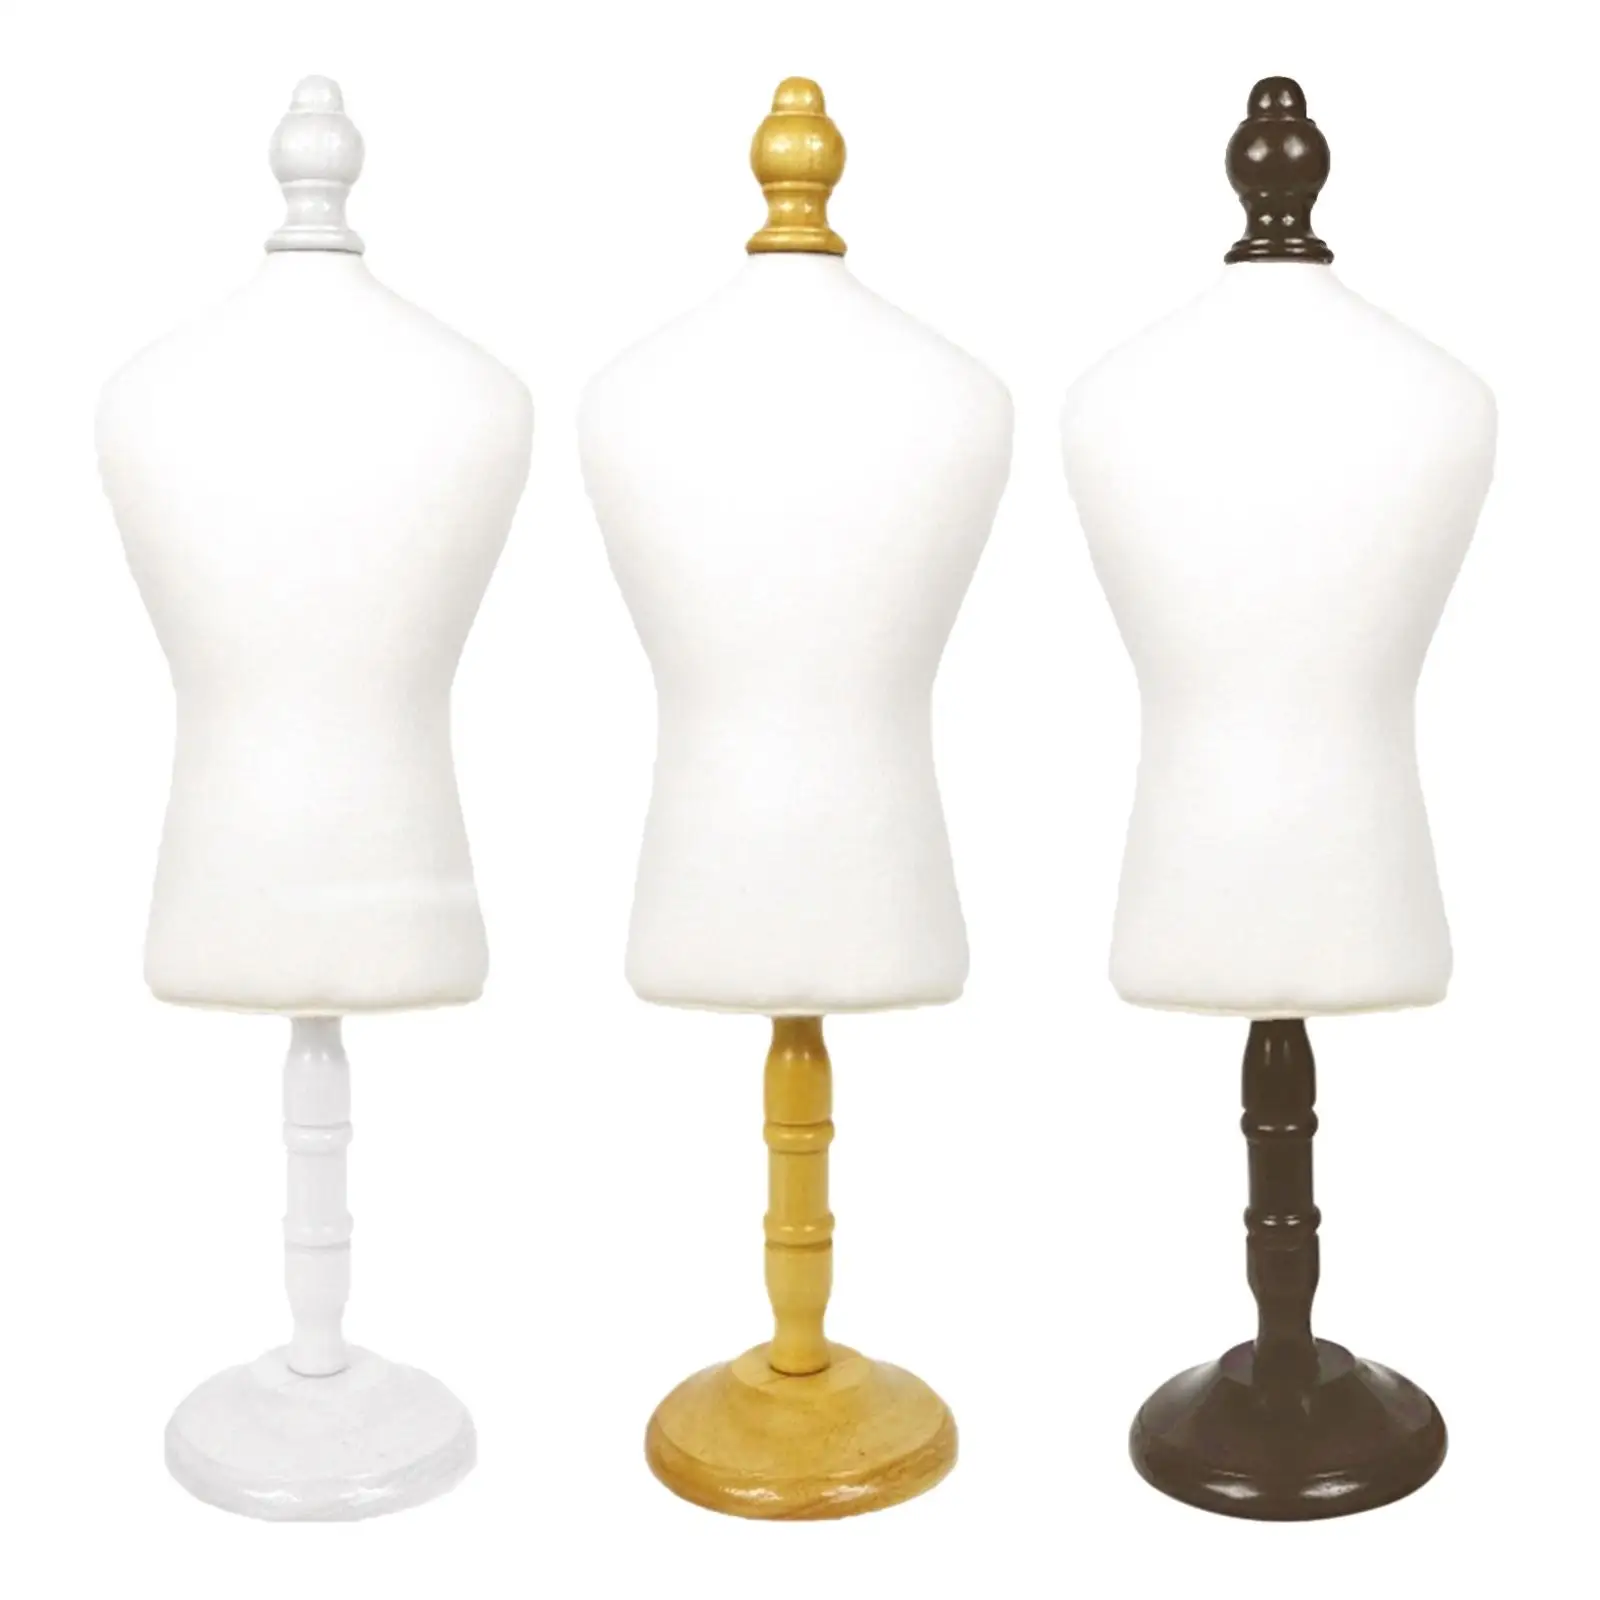  Display Holder  Model Stand Accessories with Round Wooden Base Support Tools Miniature for Dress Display Clothes Sewing